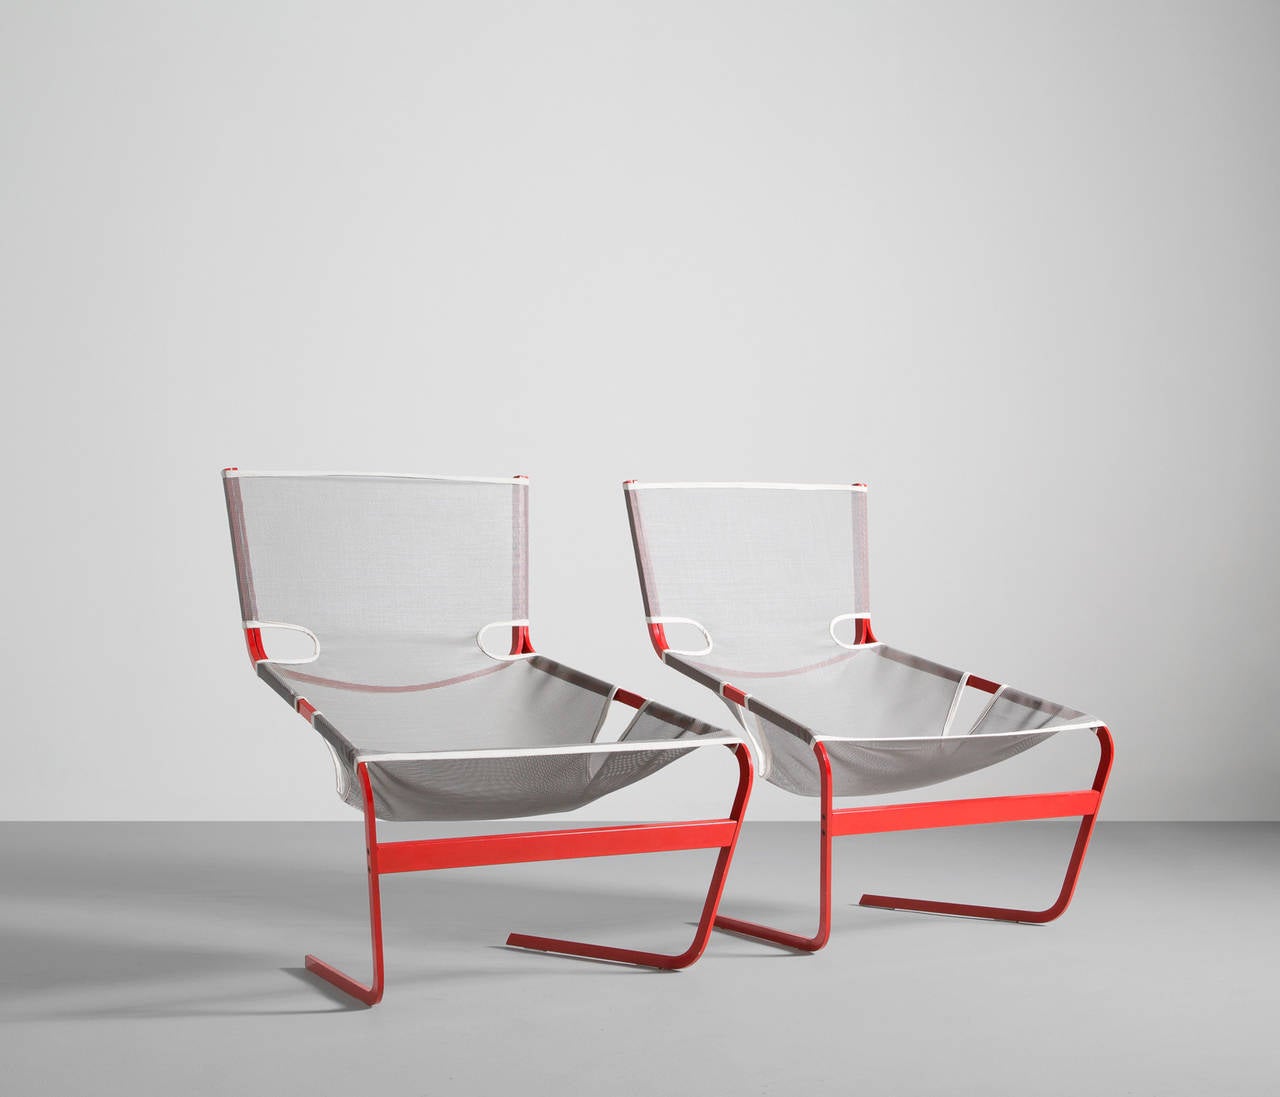 A rare and quite unique set of the F444 lounge chair by Pierre Paulin for Artifort.
The chairs show a verity of stunning, thoughtful and sharp lines. The hanging seat creates a elegant floating effect.

The red lacquered frame combined with the